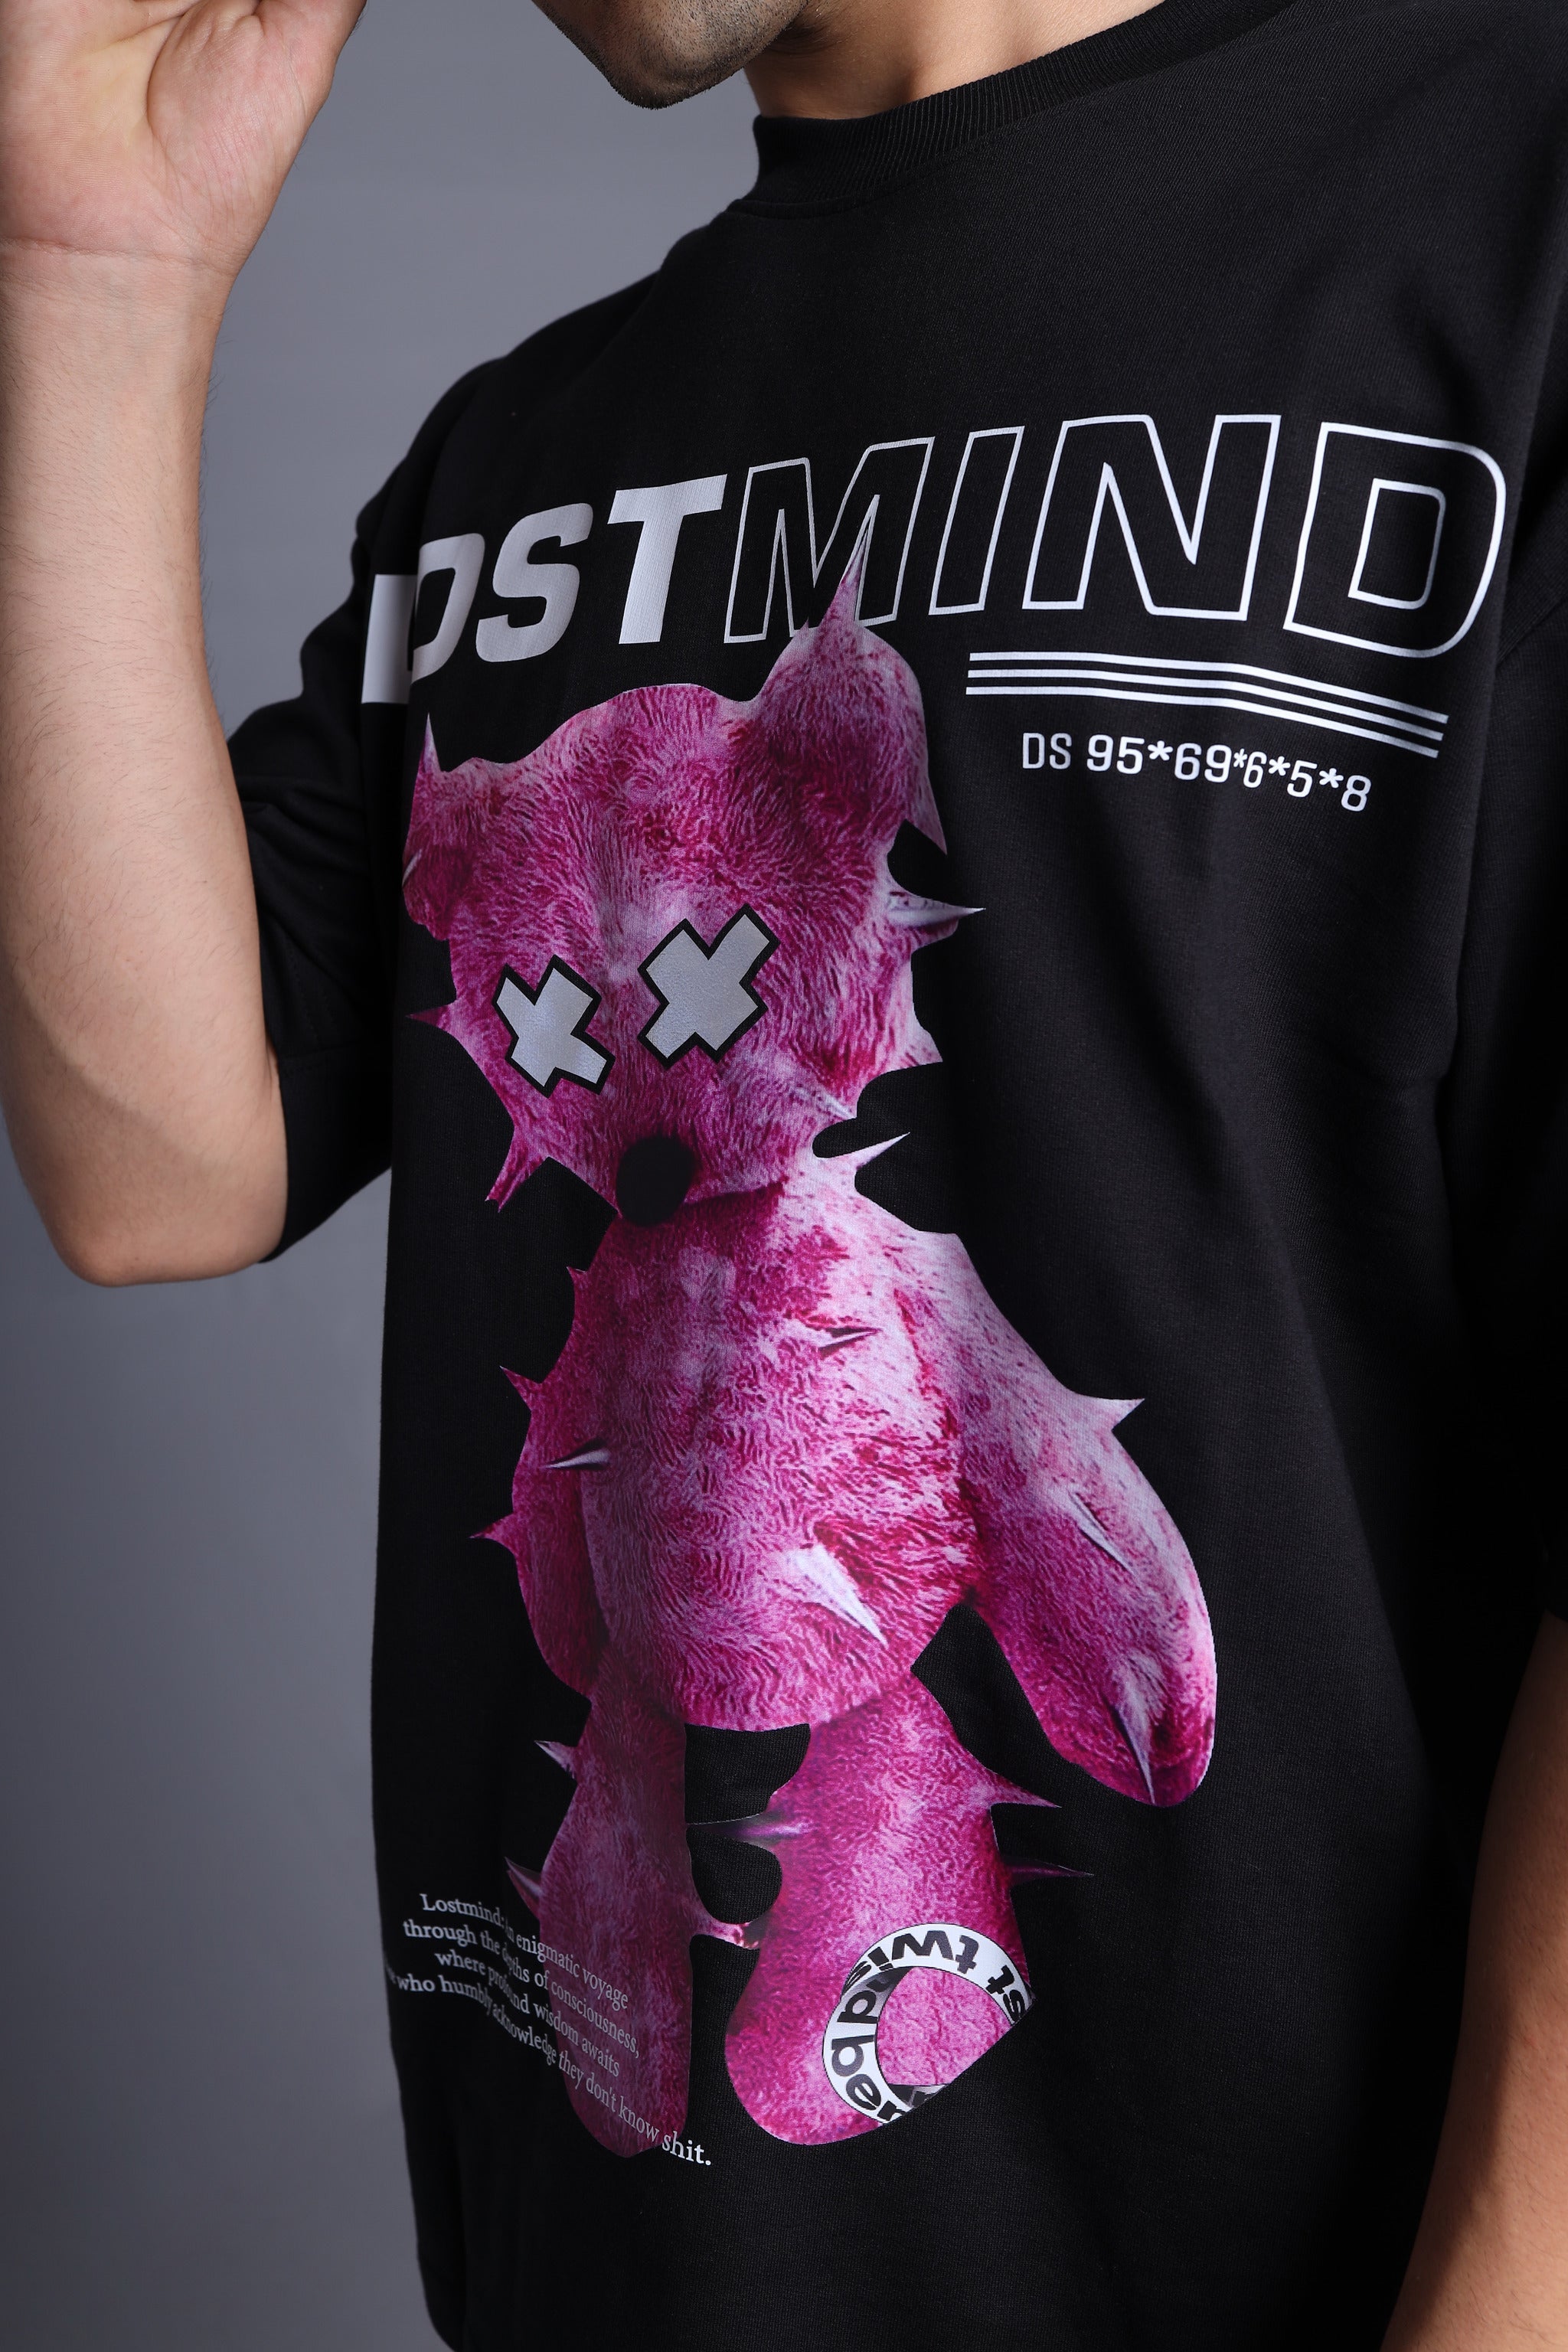 Lostmind Reflective Tee